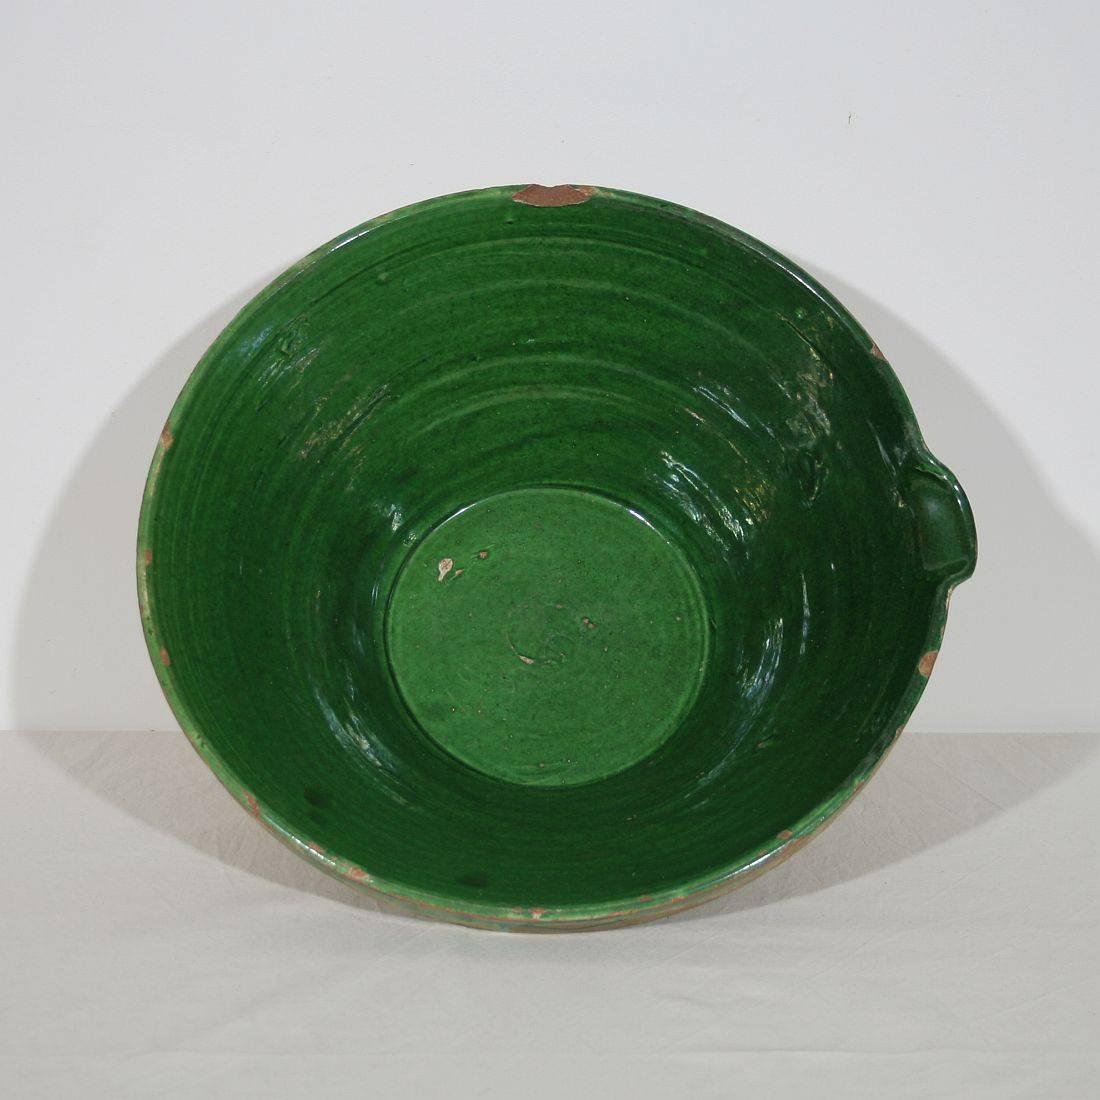 Fabulous antique French tian (bowl) handmade from terracotta with a distinctive deep green glaze. Perfect for as a fruit bowl, as the perfect centerpiece with a bouquet of flowers, or alone as an awesome Country French accent. Tian is a word which